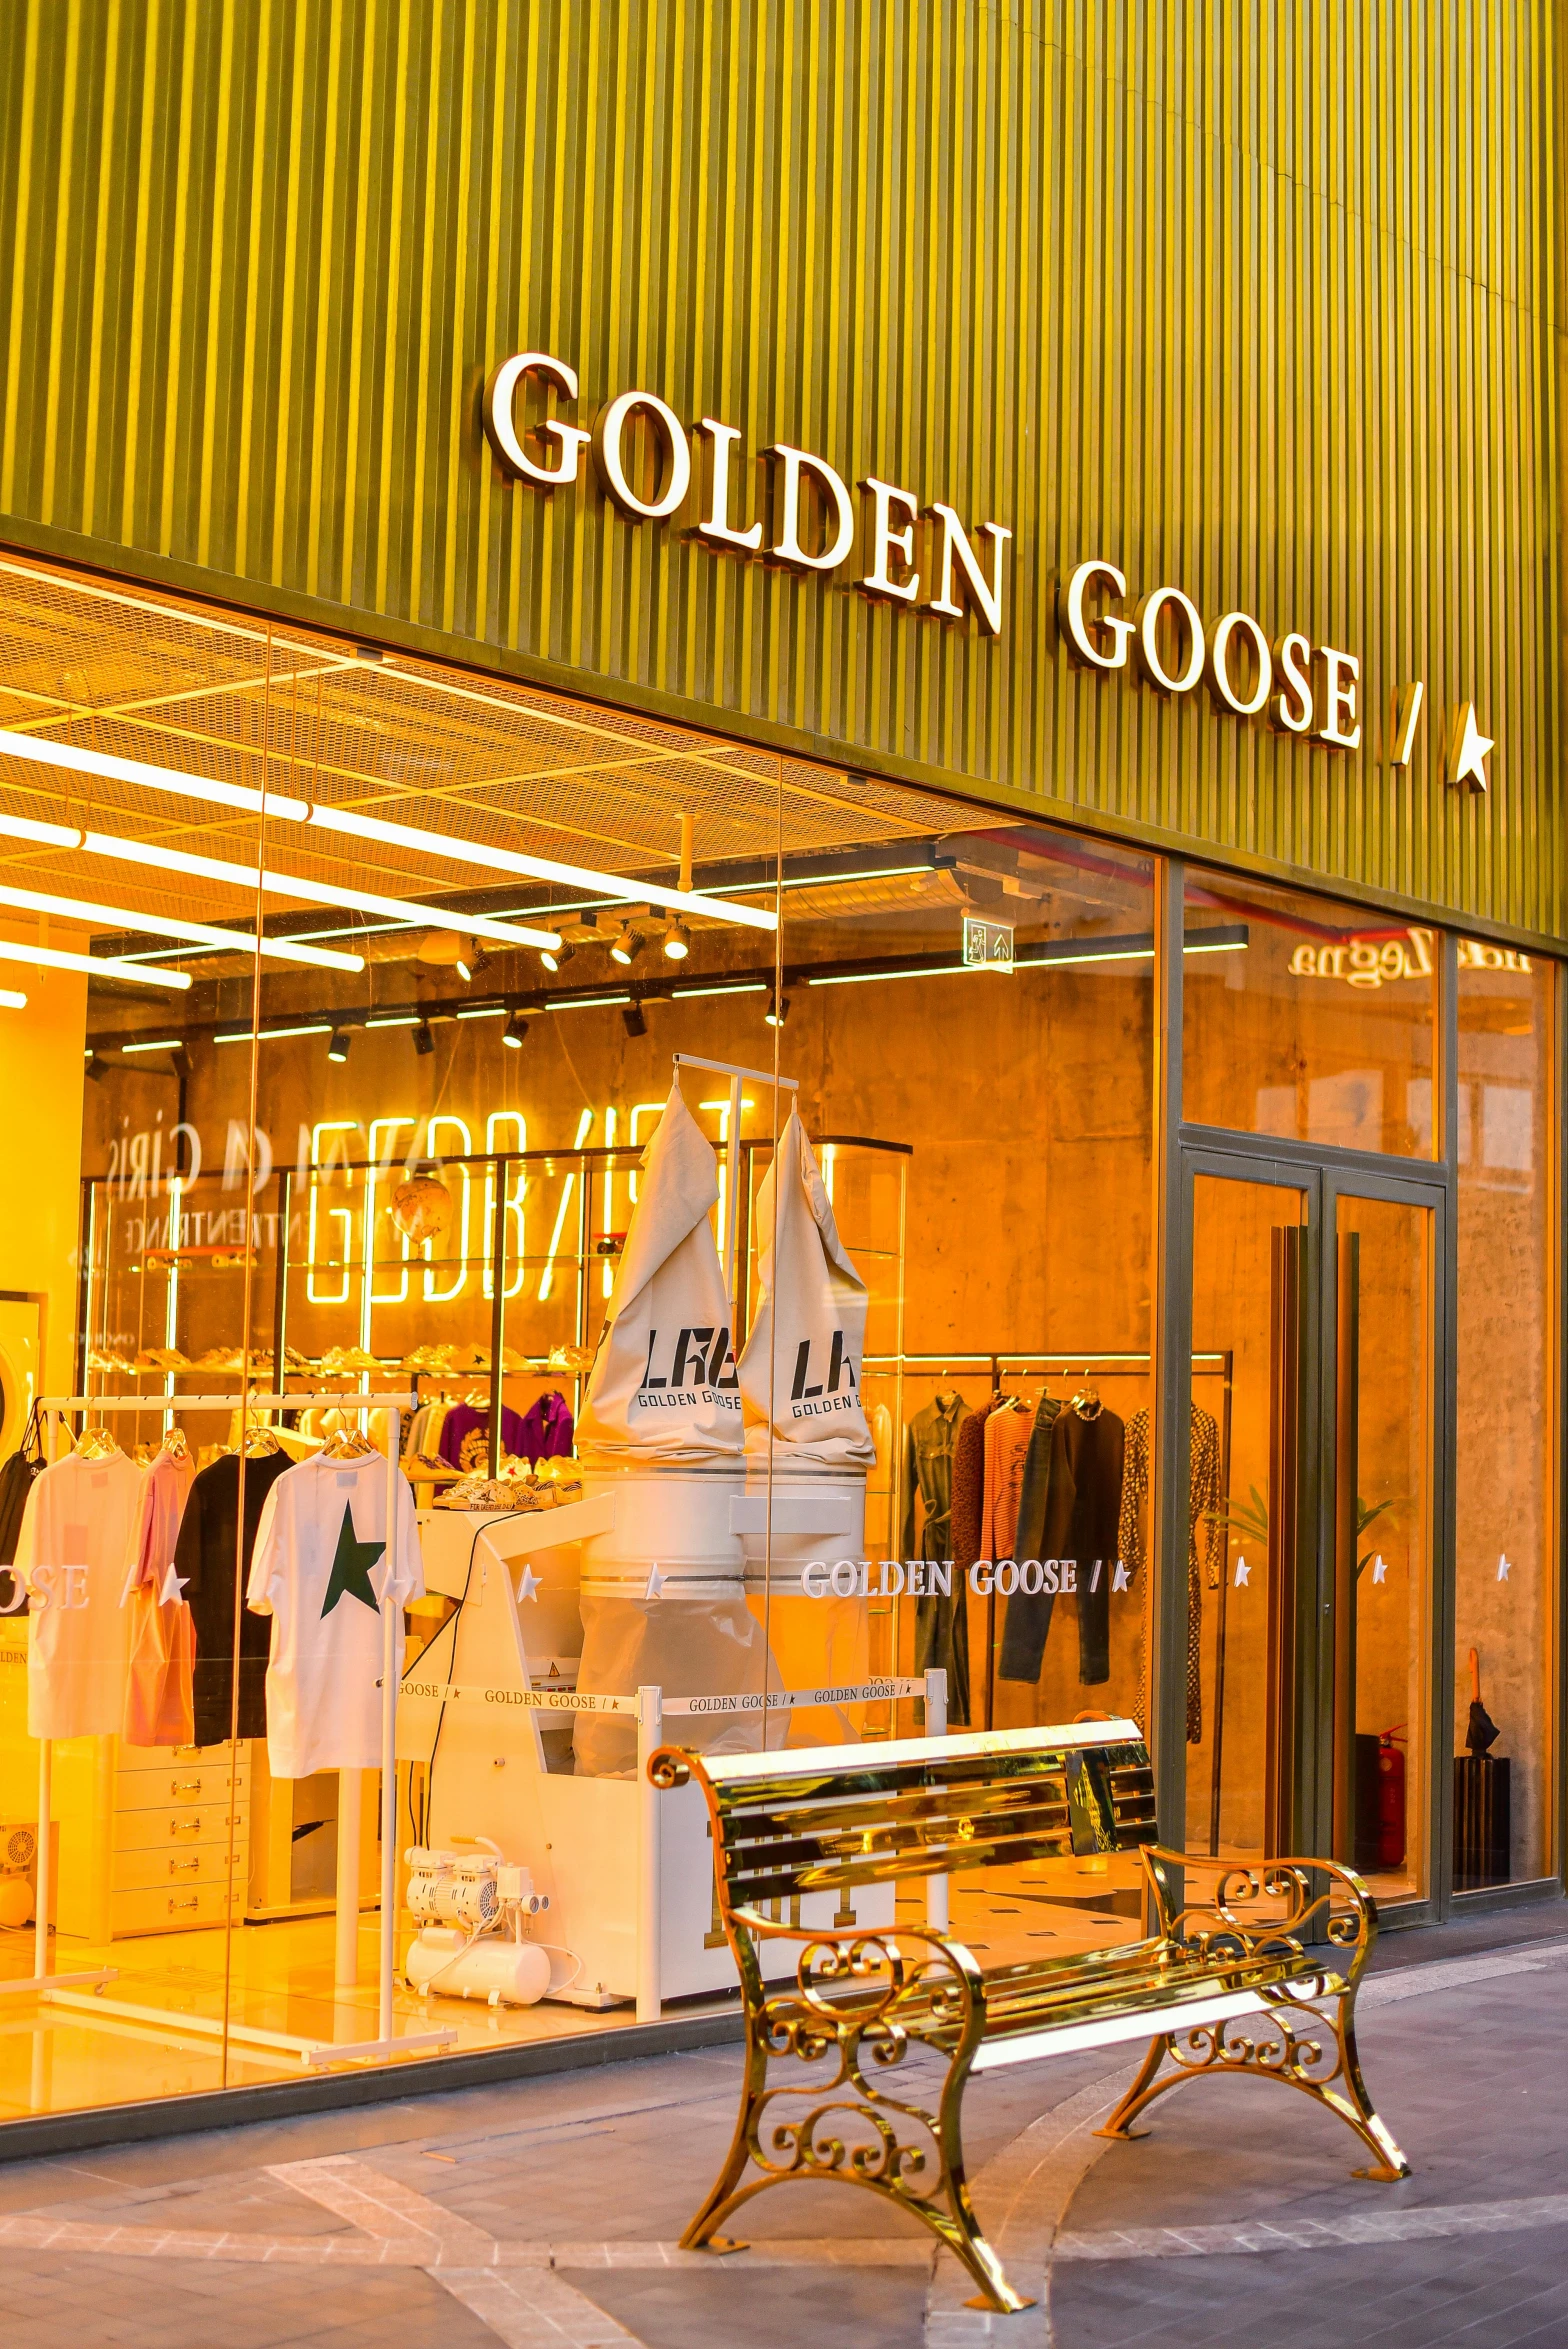 a window display of gold goose at night